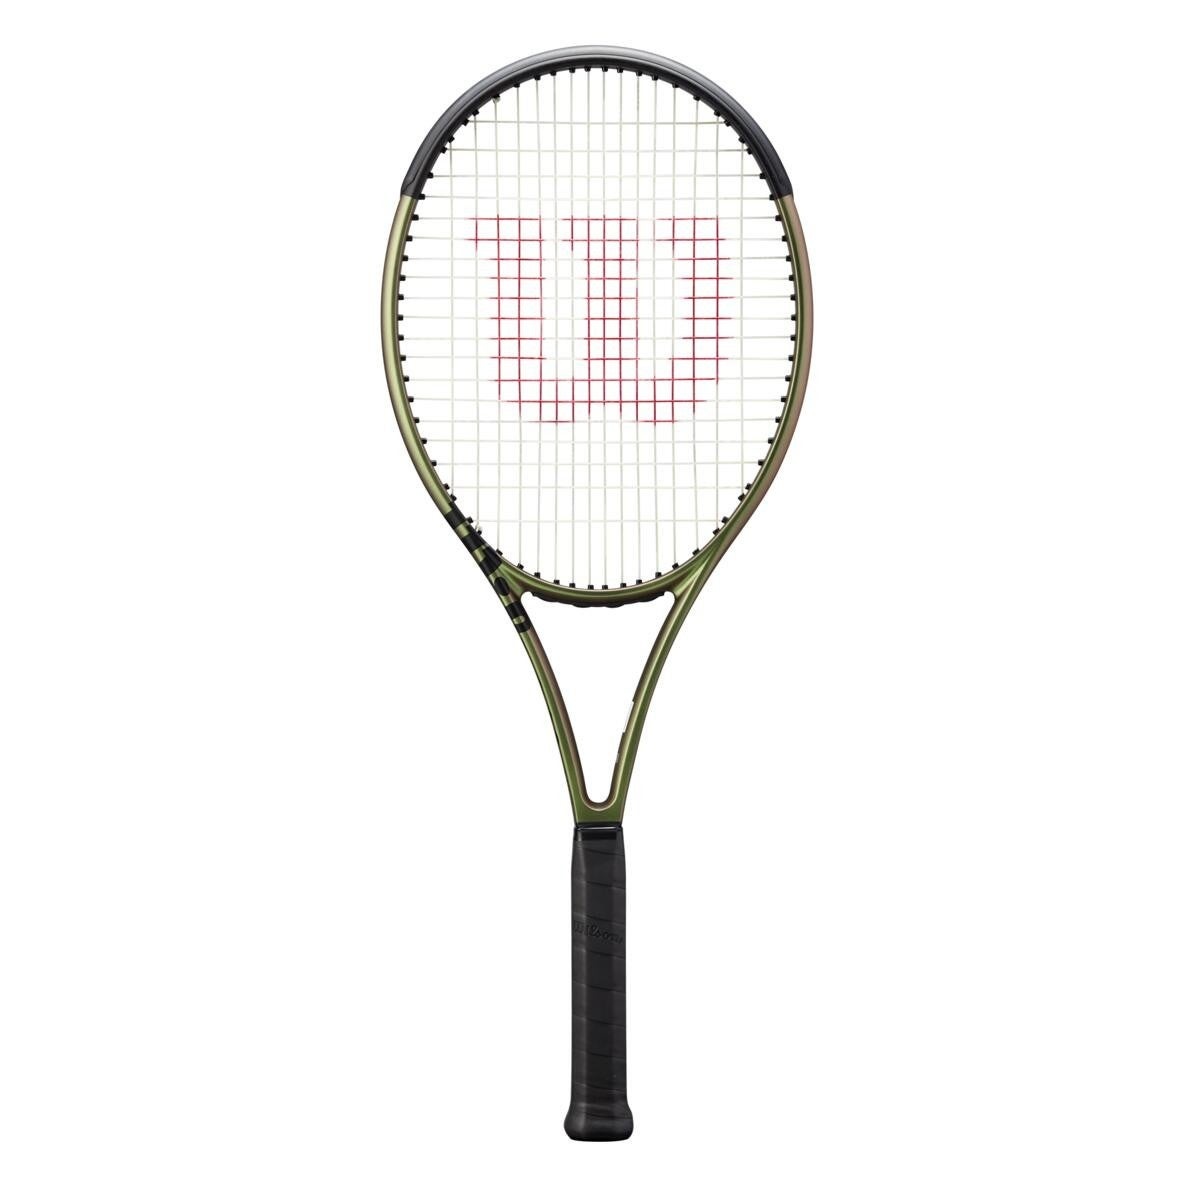 Blade 100L v8 - Tennis Topia - Best Sale Prices and Service in Tennis